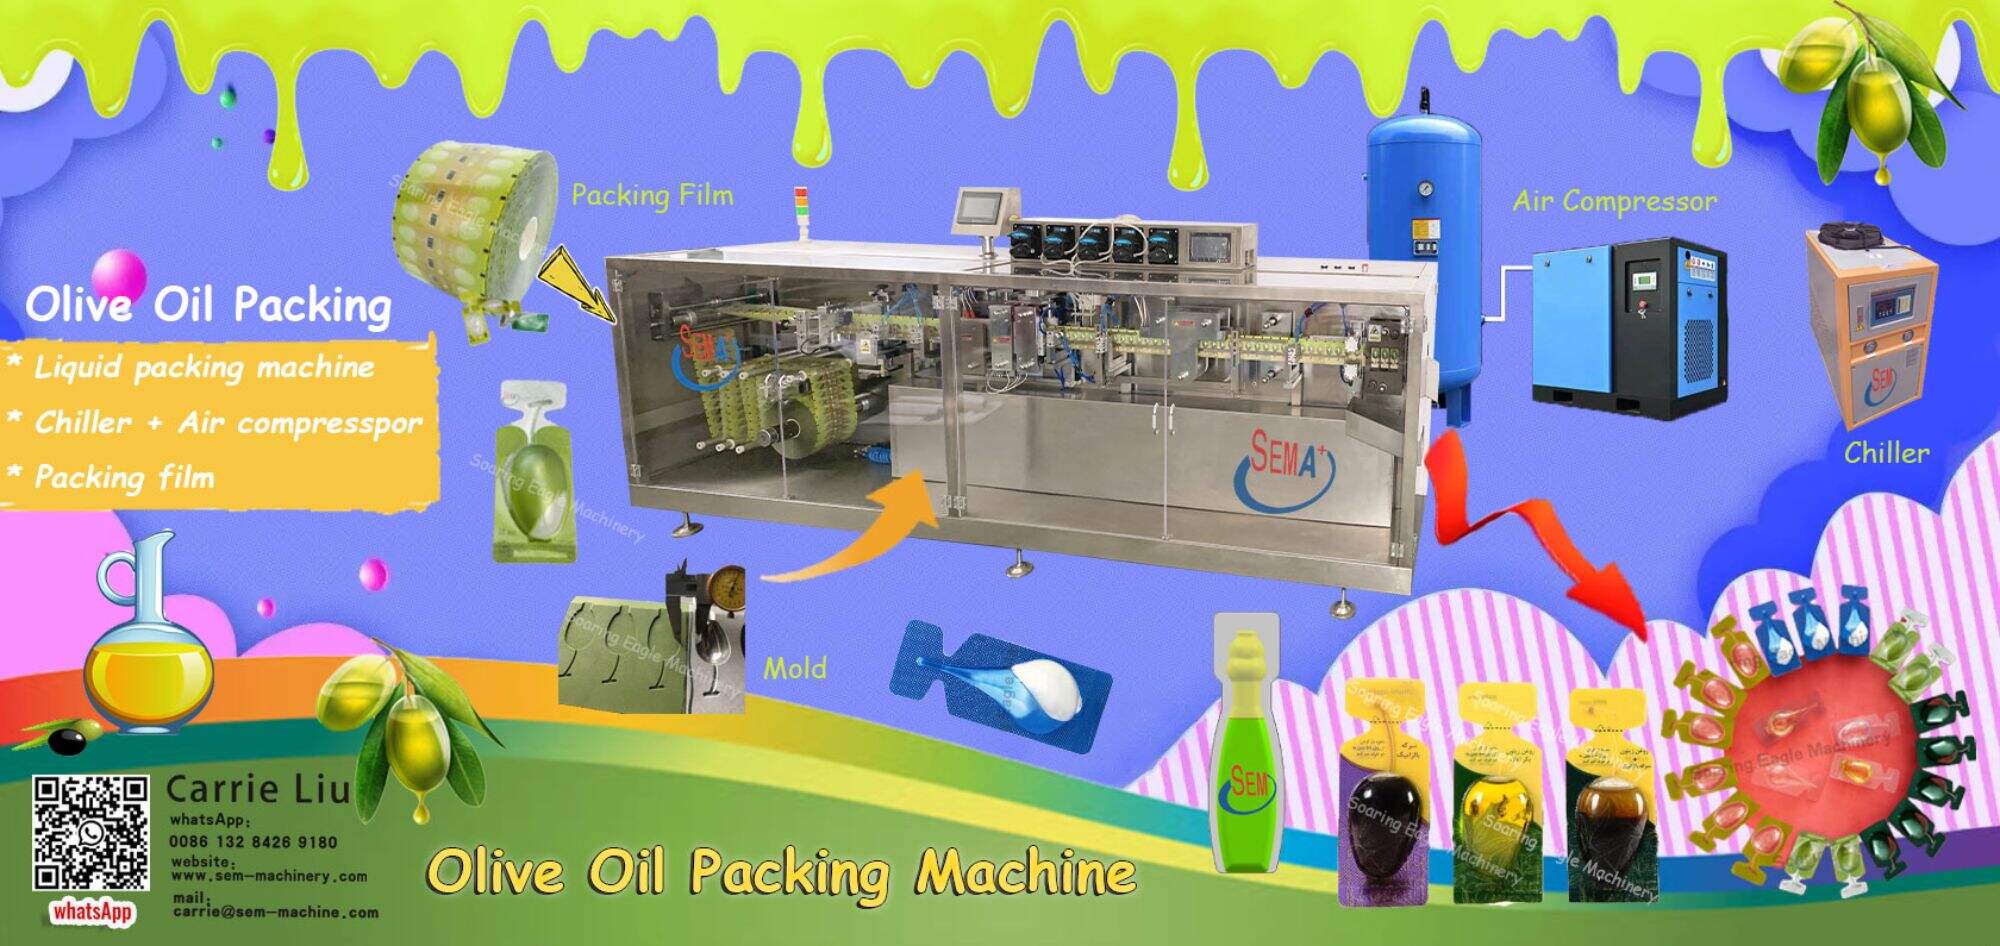 DGS 240 OLIVE OIL Forming Filling Sealing Ampoule Filling Machine